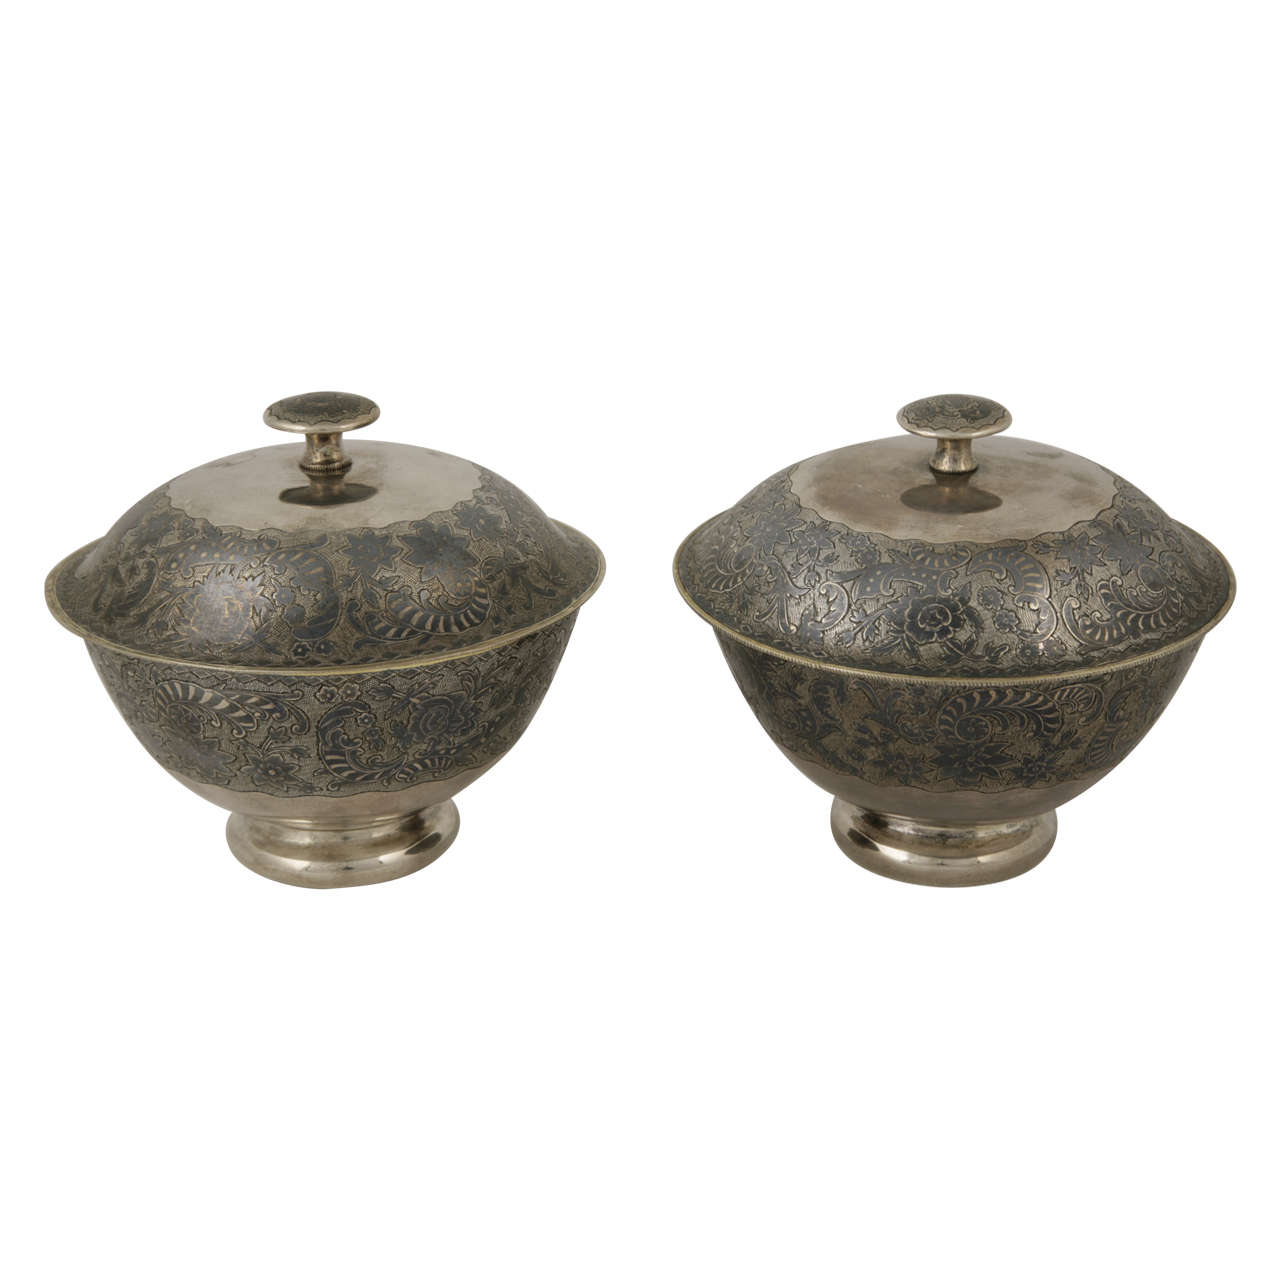 Pair of Caucasian Silver and Niello Covered Bowls